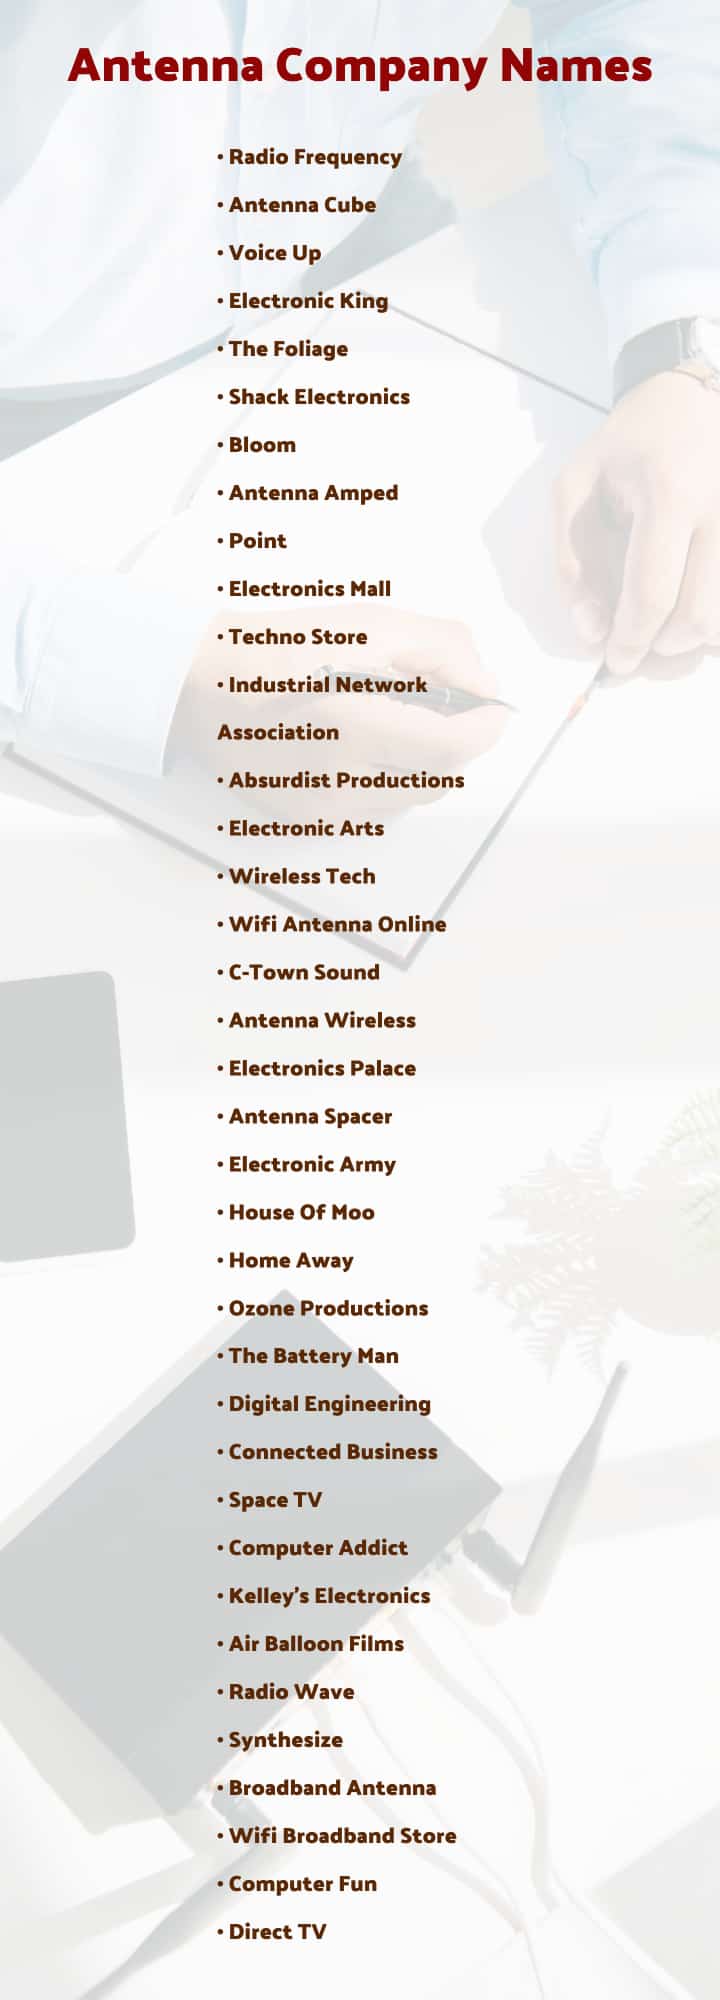 The best antenna company names list